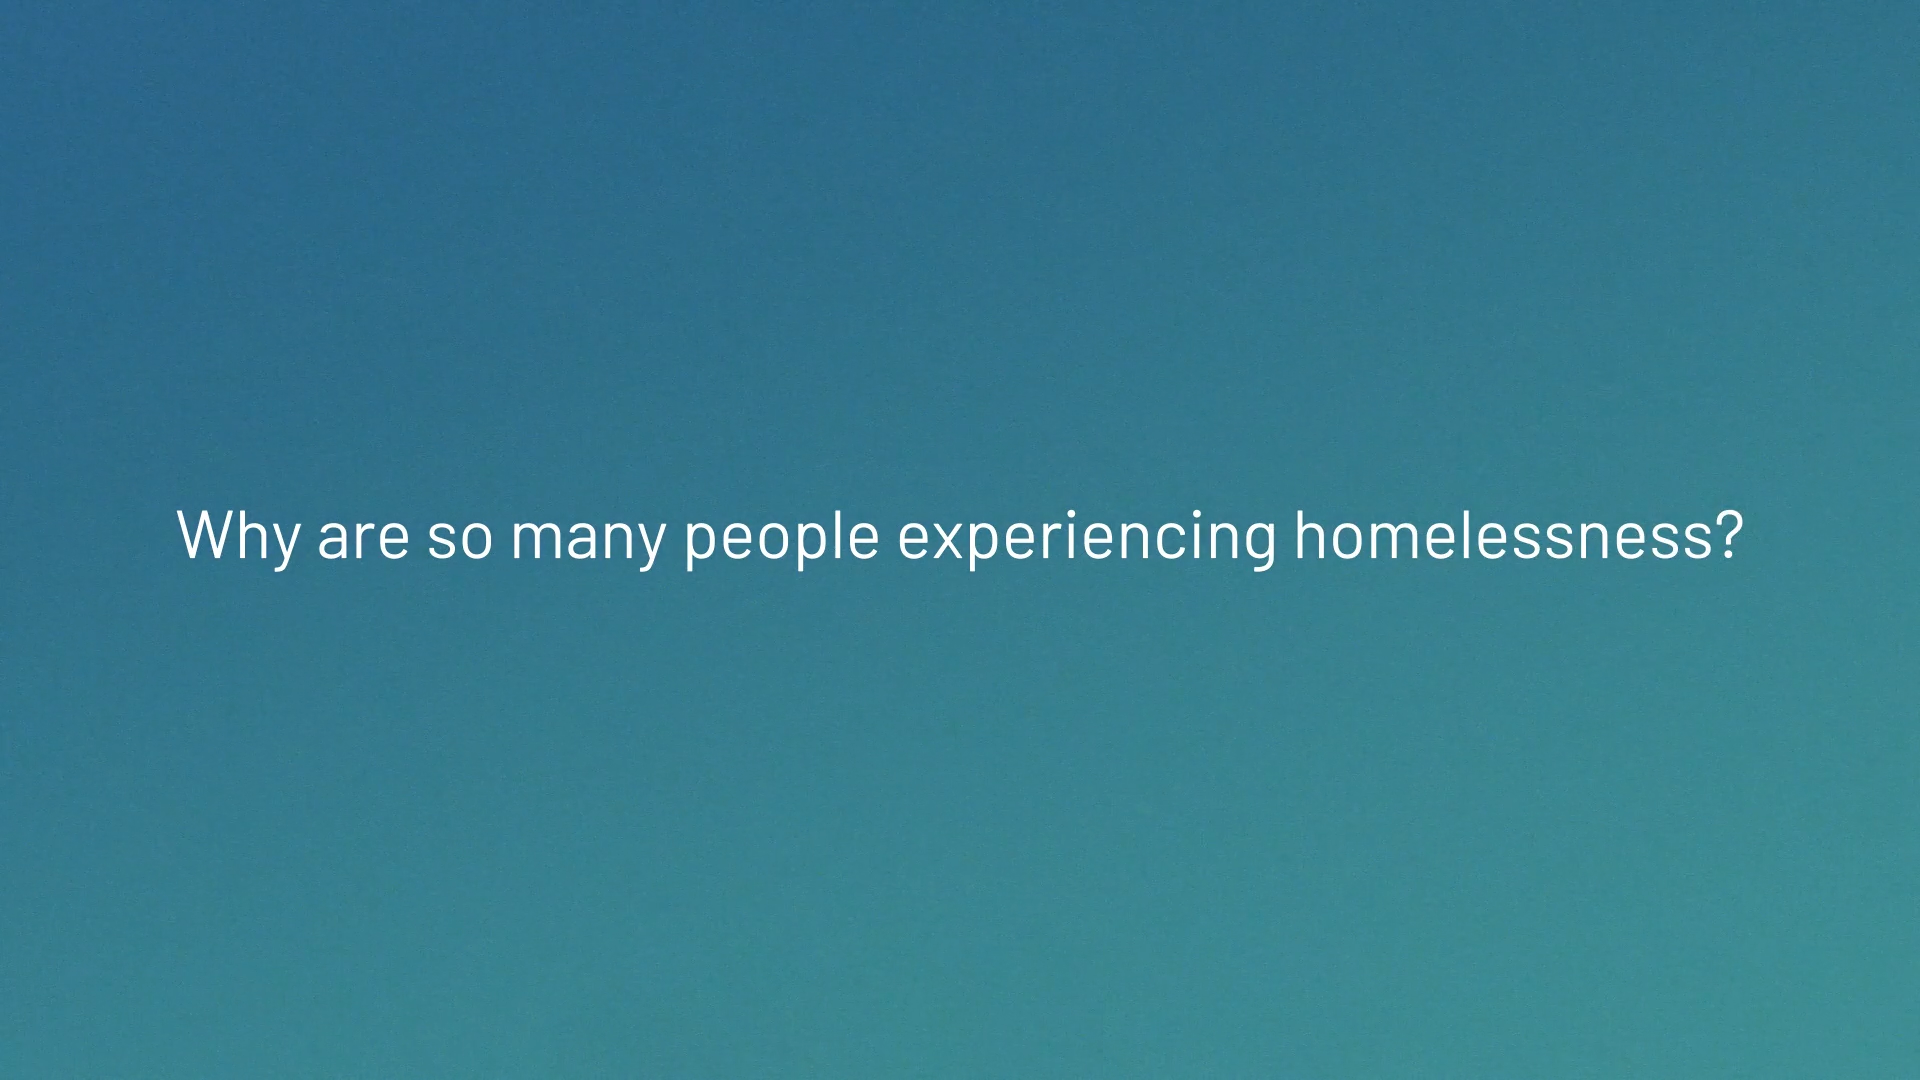 Video: Why are so many people experiencing homelessness?